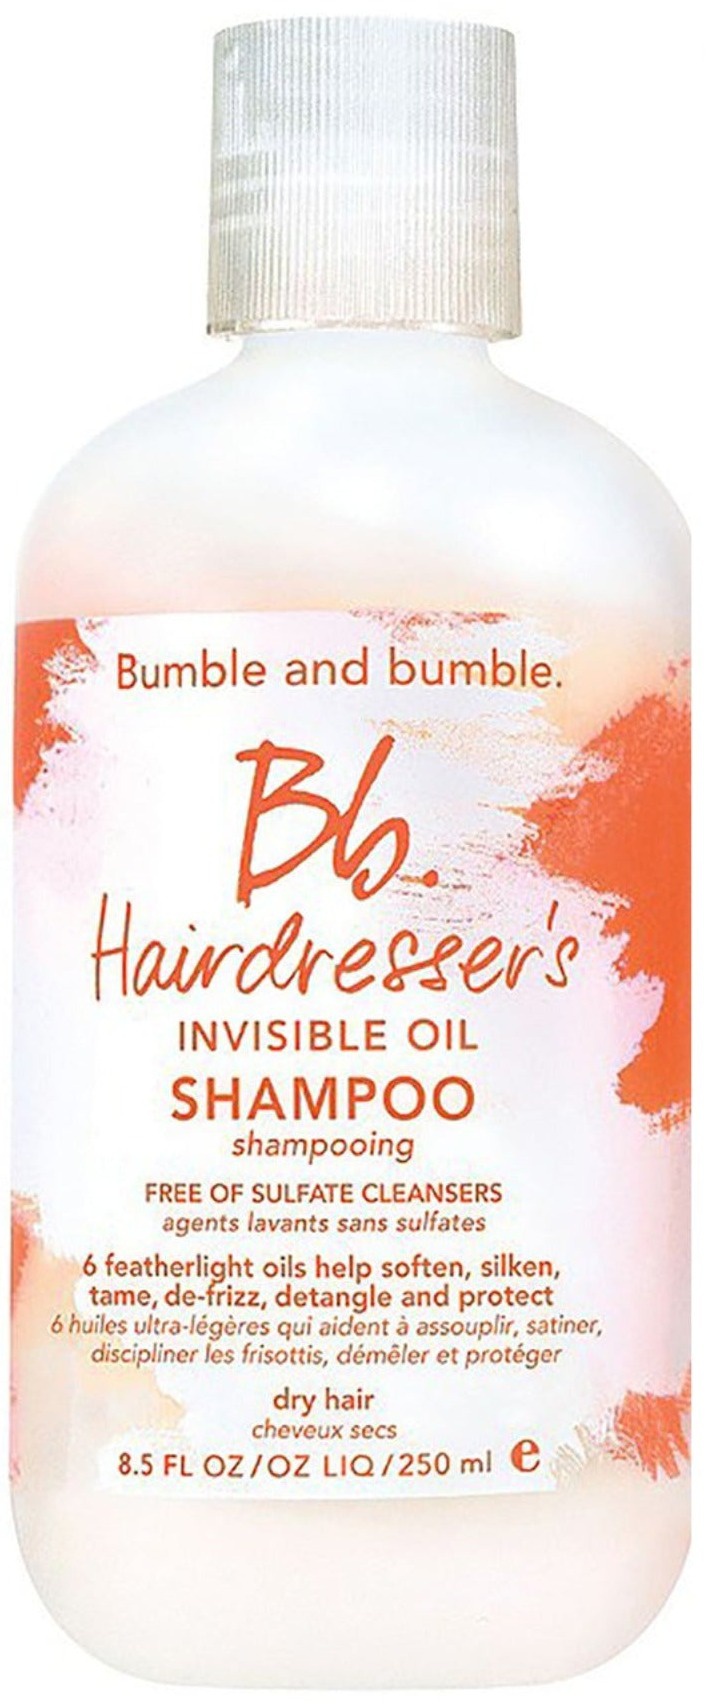 Bumble & Bumble Hairdresser’s Invisible Oil Shampoo